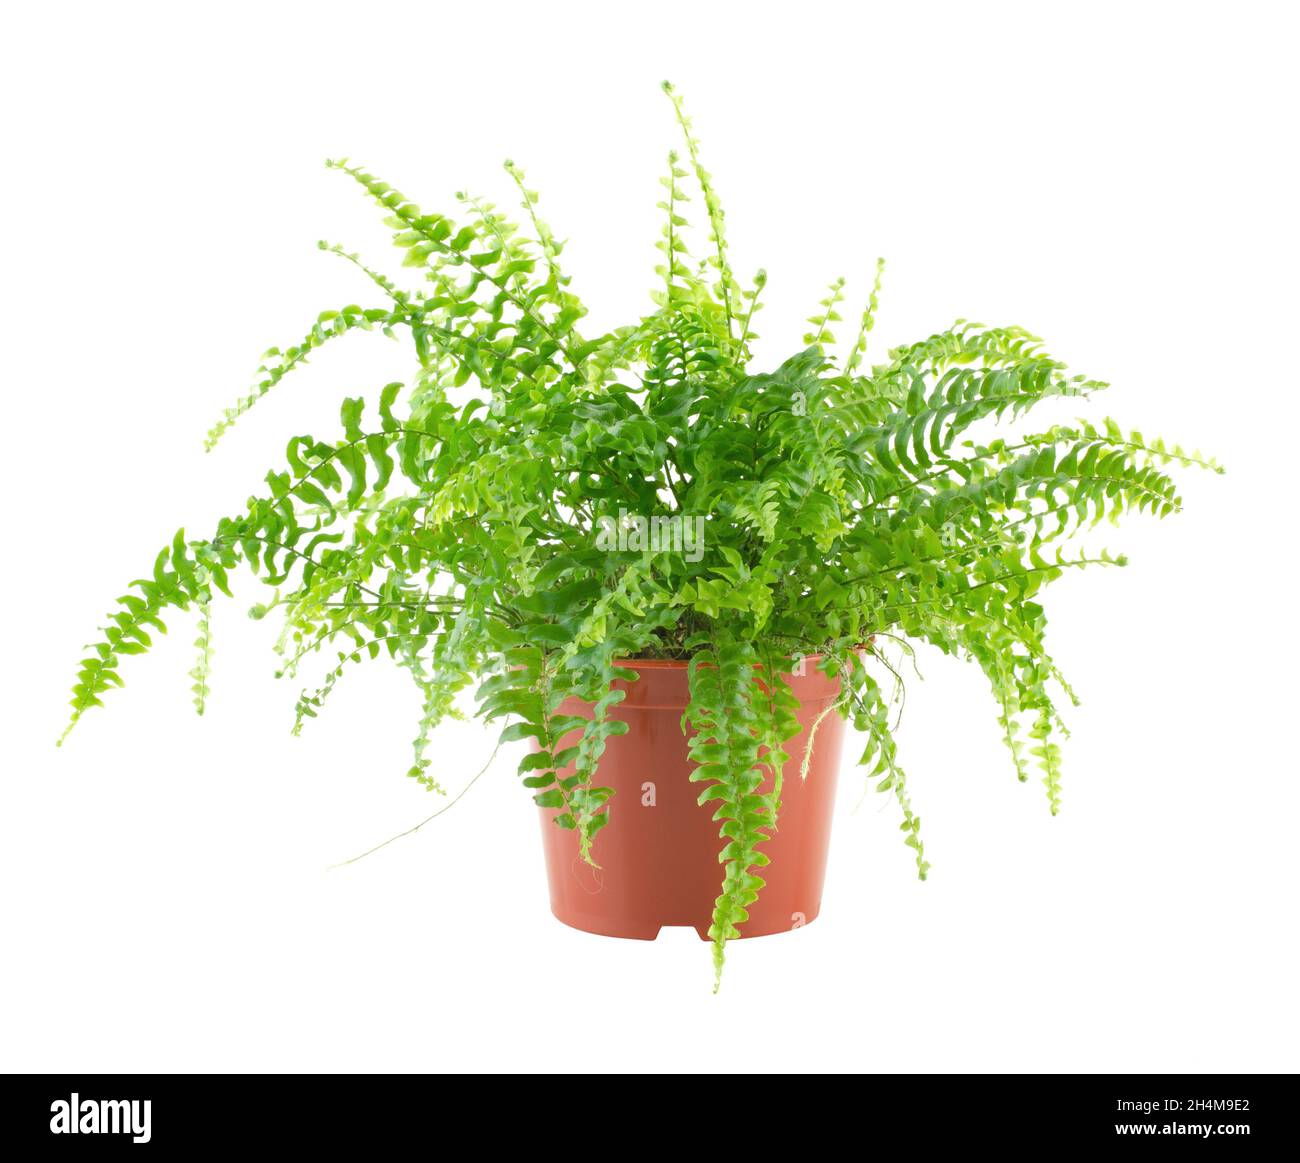 Fern in a pot isolated on white background Stock Photo